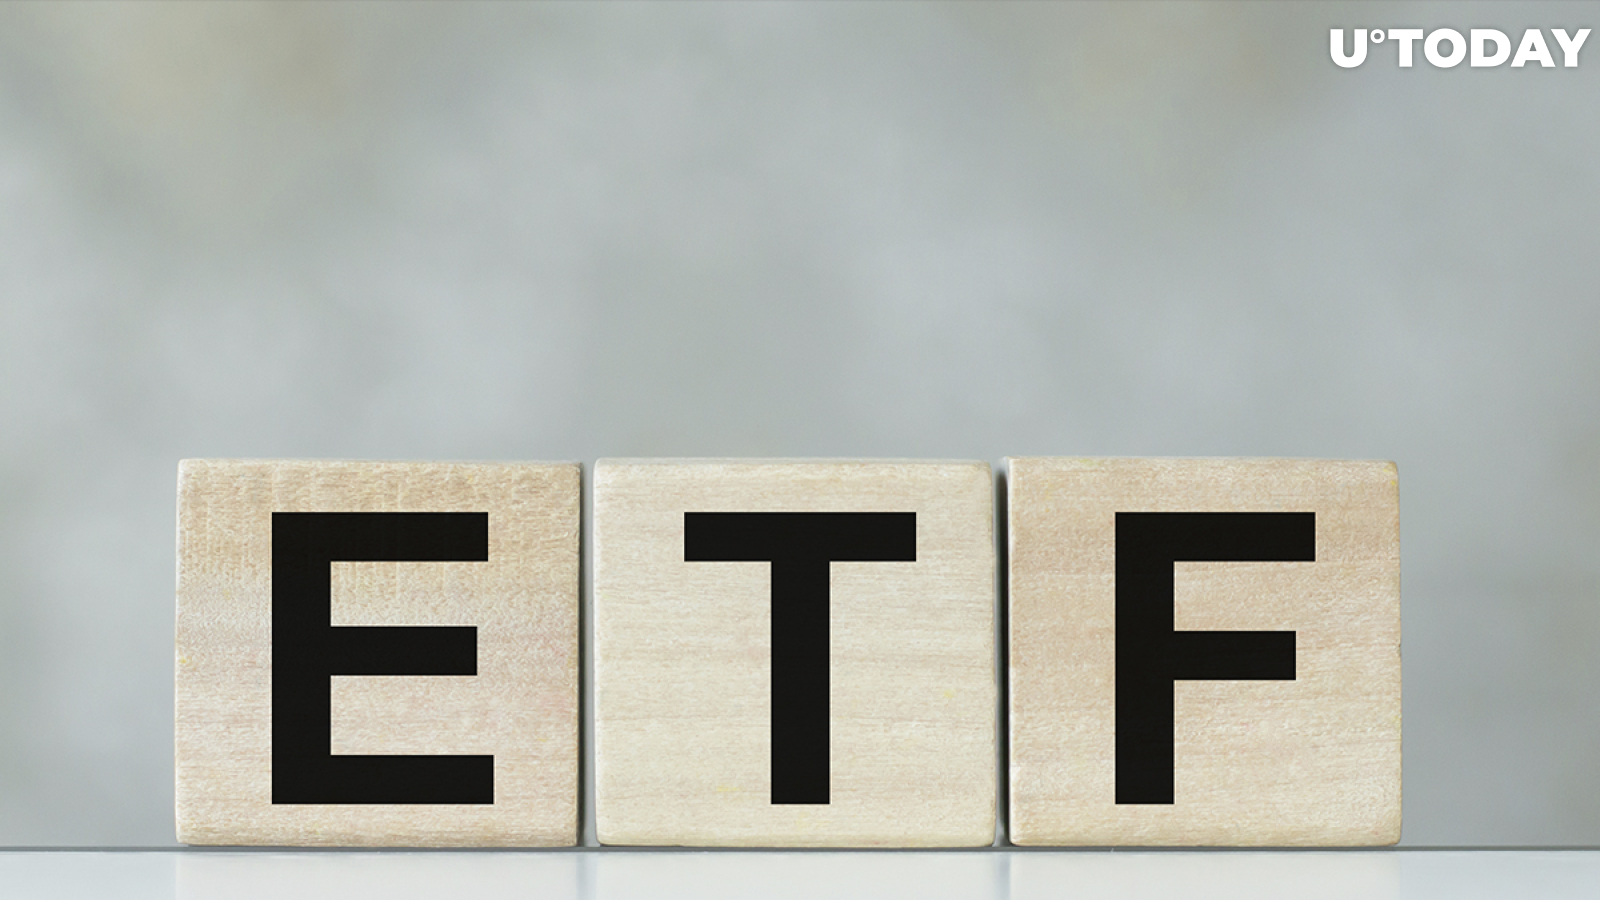 3 Reasons Why Bitcoin ETFs Differ from Gold's $10 Trillion Case